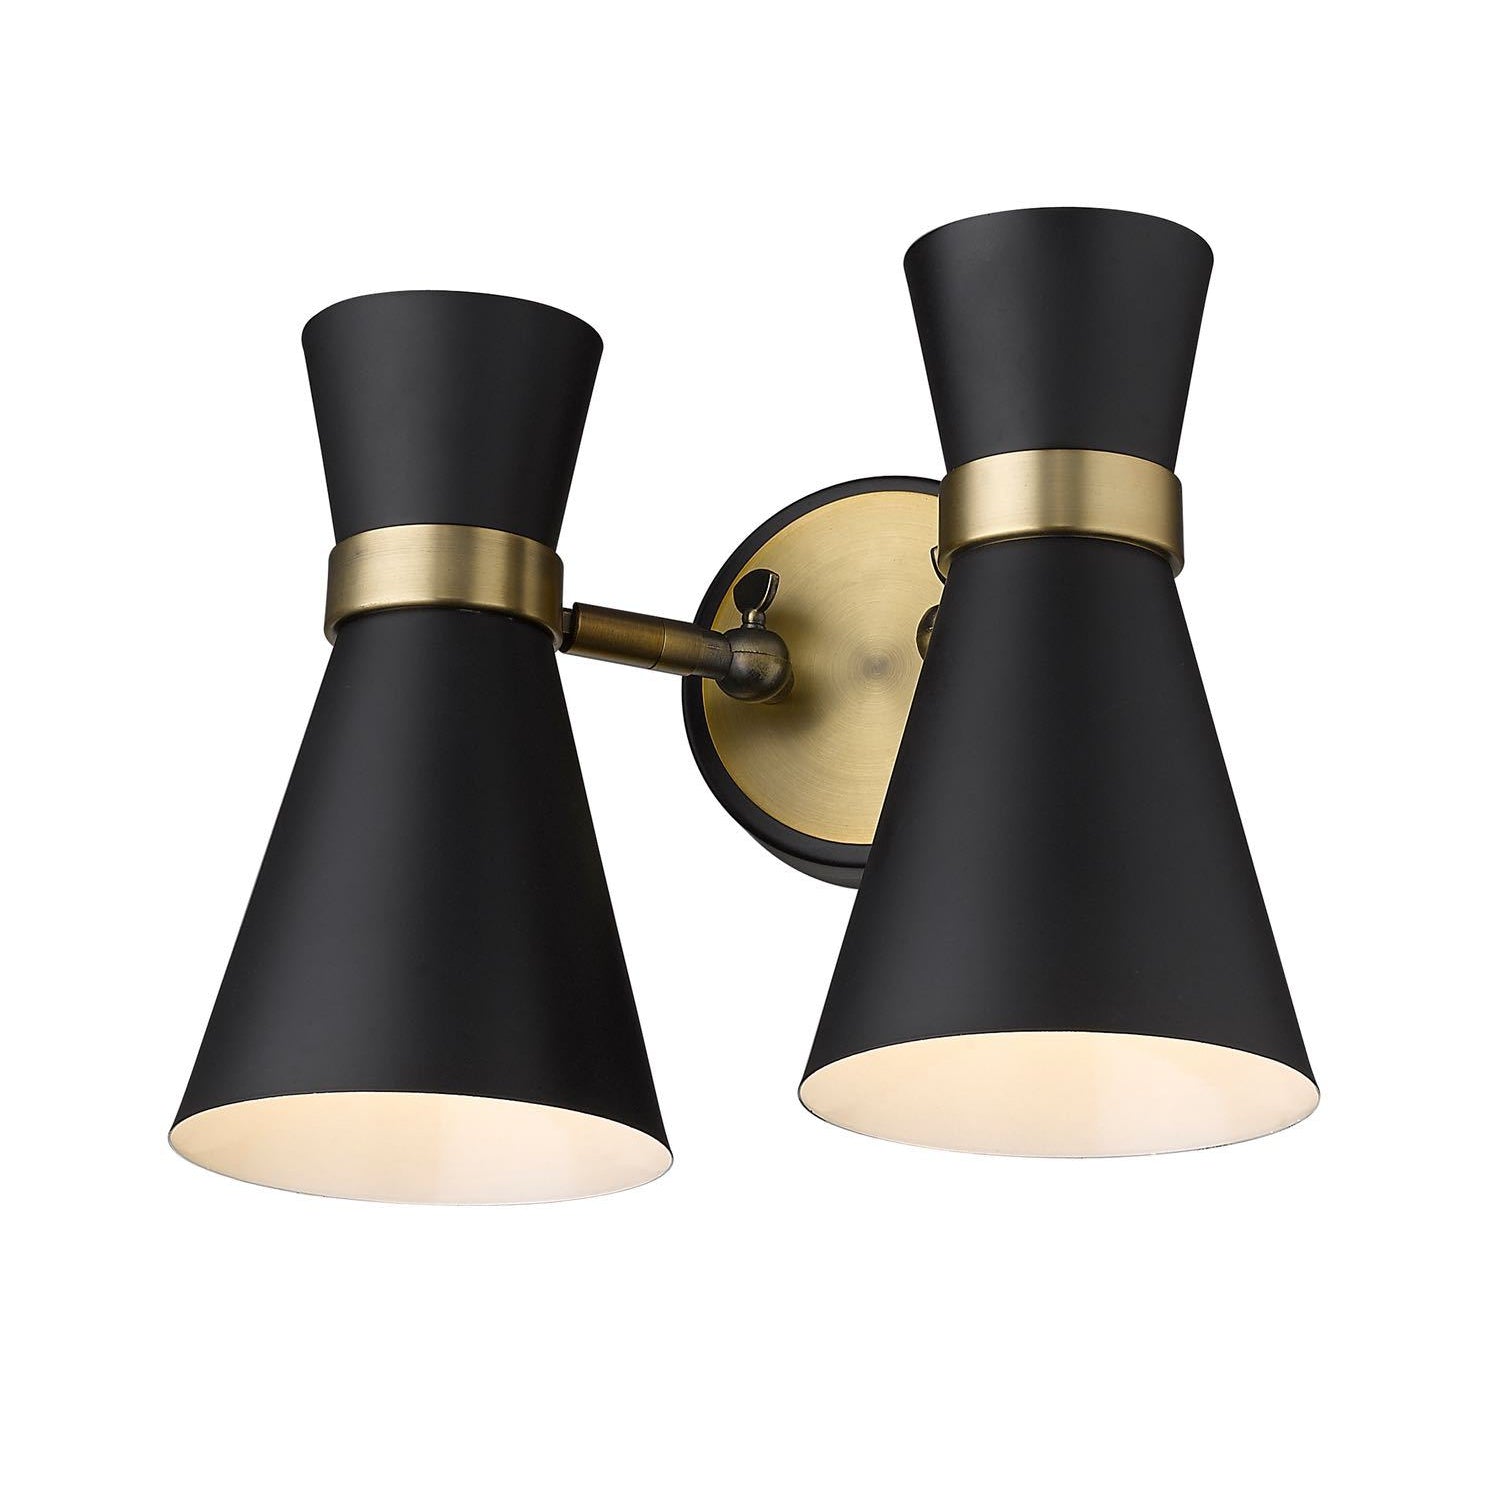 Soriano Wall Sconce Matte Black + Heritage Brass